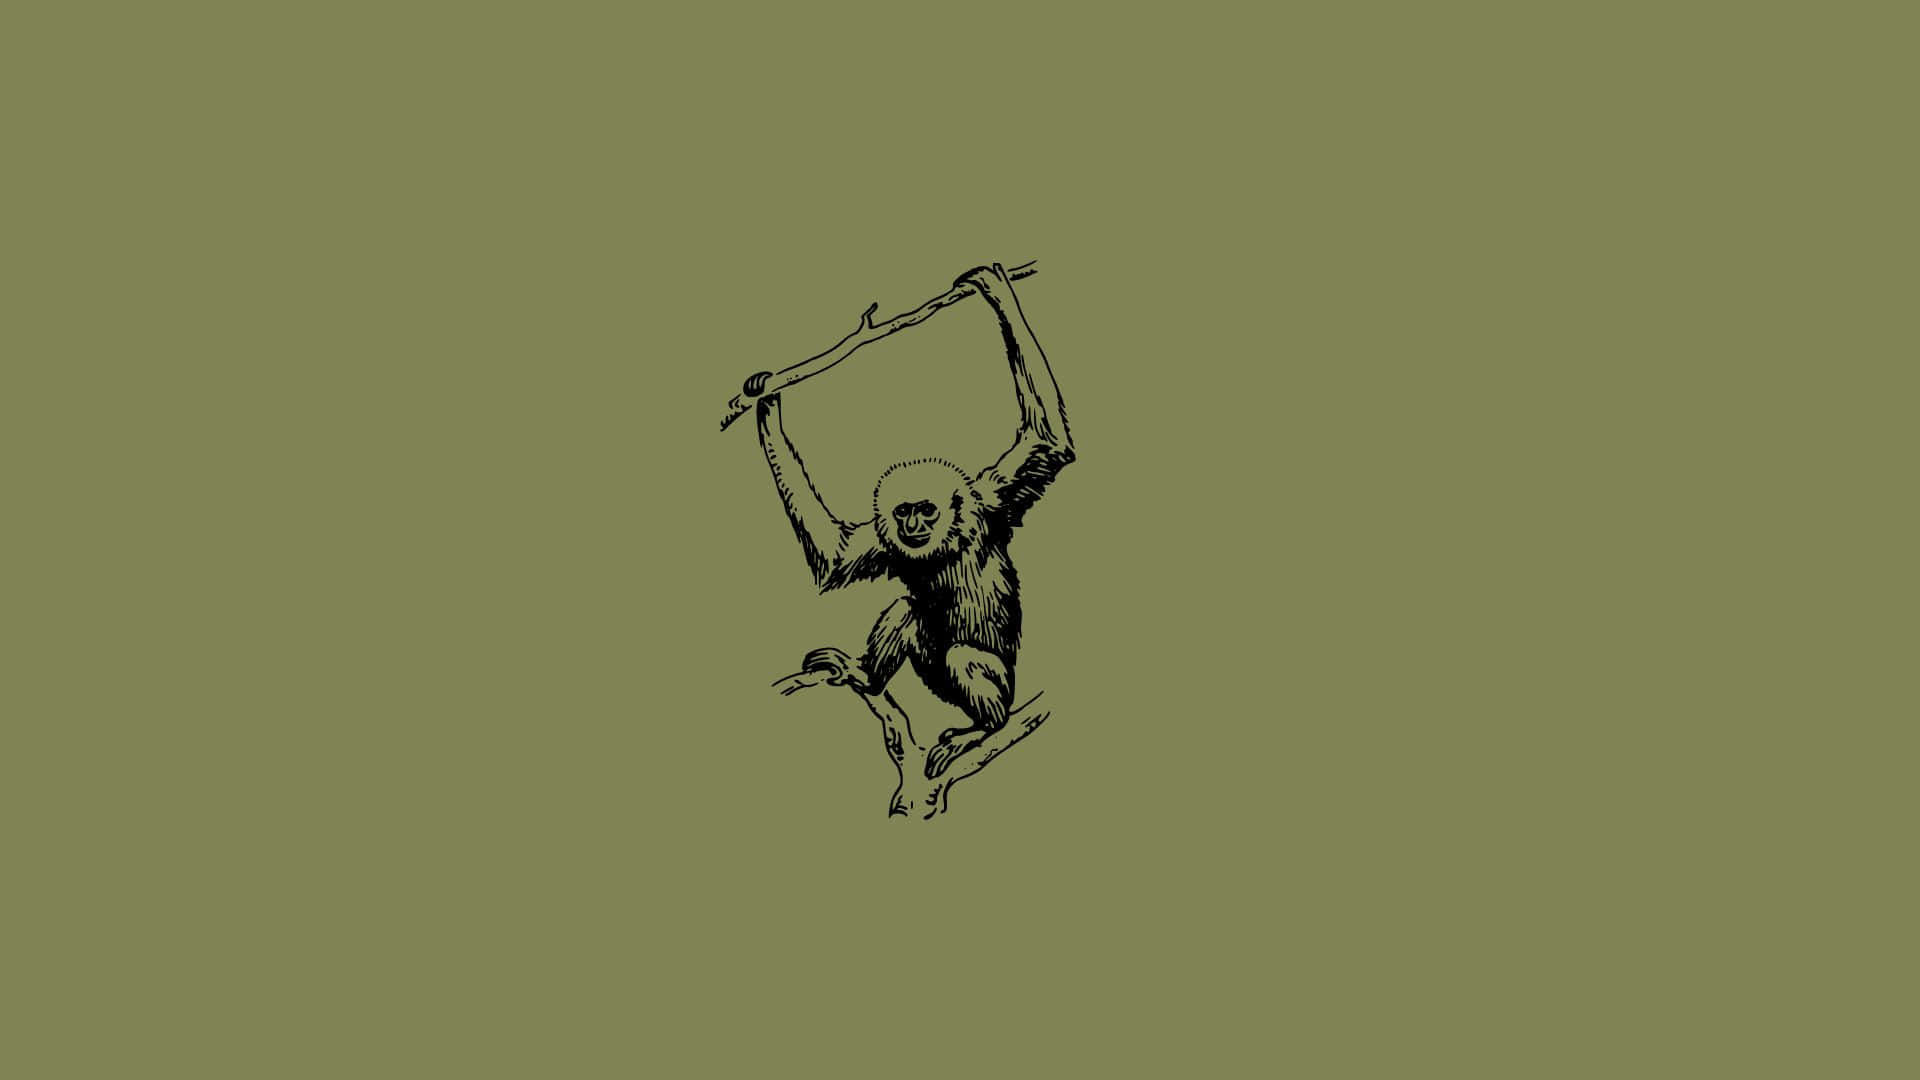 A Drawing Of A Monkey Hanging On A Branch